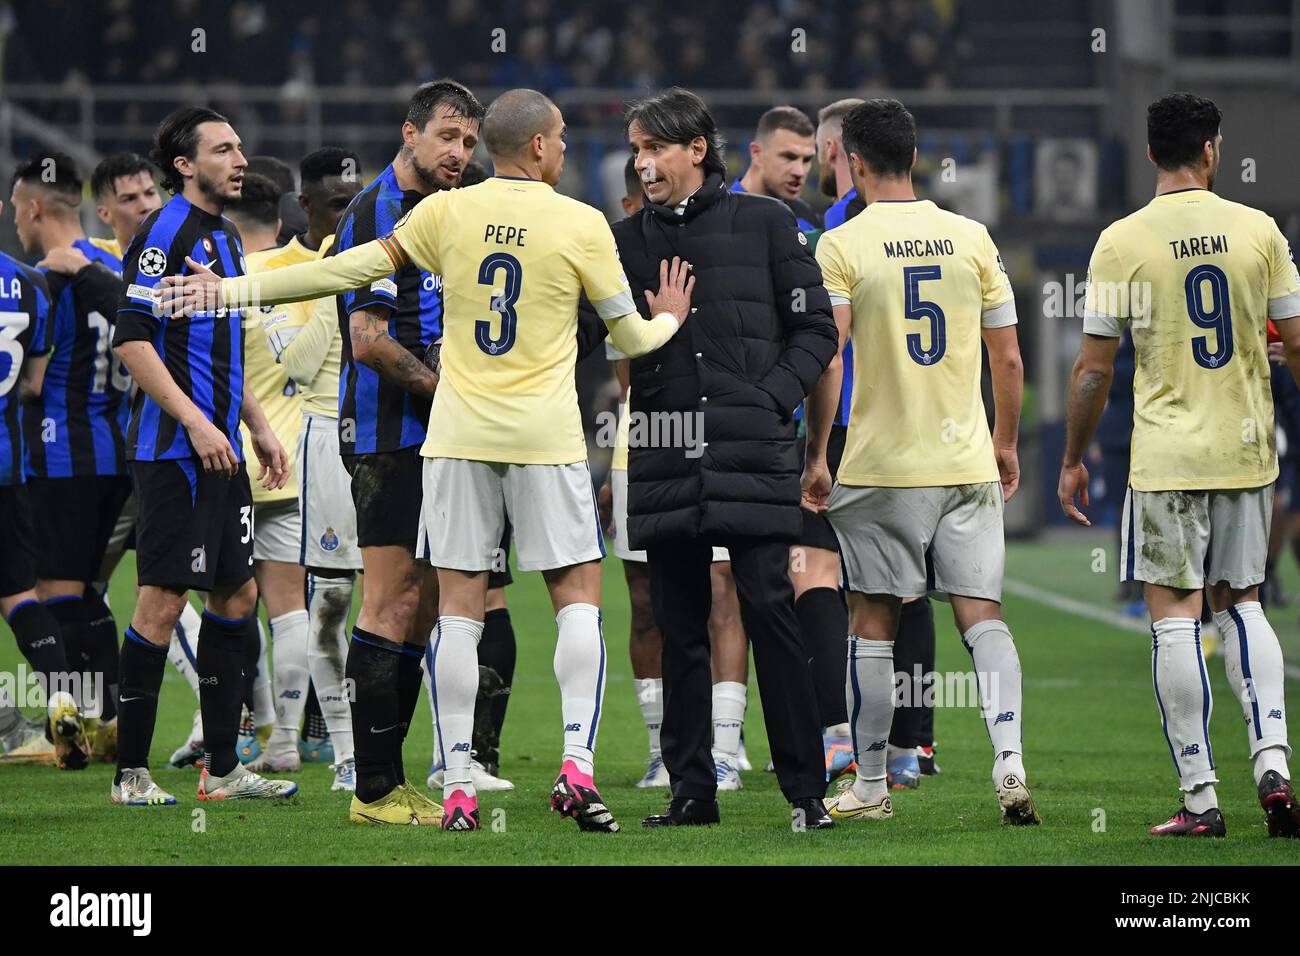 Milano, Italy. 22nd Feb, 2023. Kepler Laveran Lima Ferreira alias Pepe of FC Porto argues with Simone Inzaghi head coach of FC Internazionale during the Champions League football match between FC Internazionale and FC Porto at San Siro stadium in Milano (Italy), February 22th, 2023. Photo Andrea Staccioli/Insidefoto Credit: Insidefoto di andrea staccioli/Alamy Live News Stock Photo